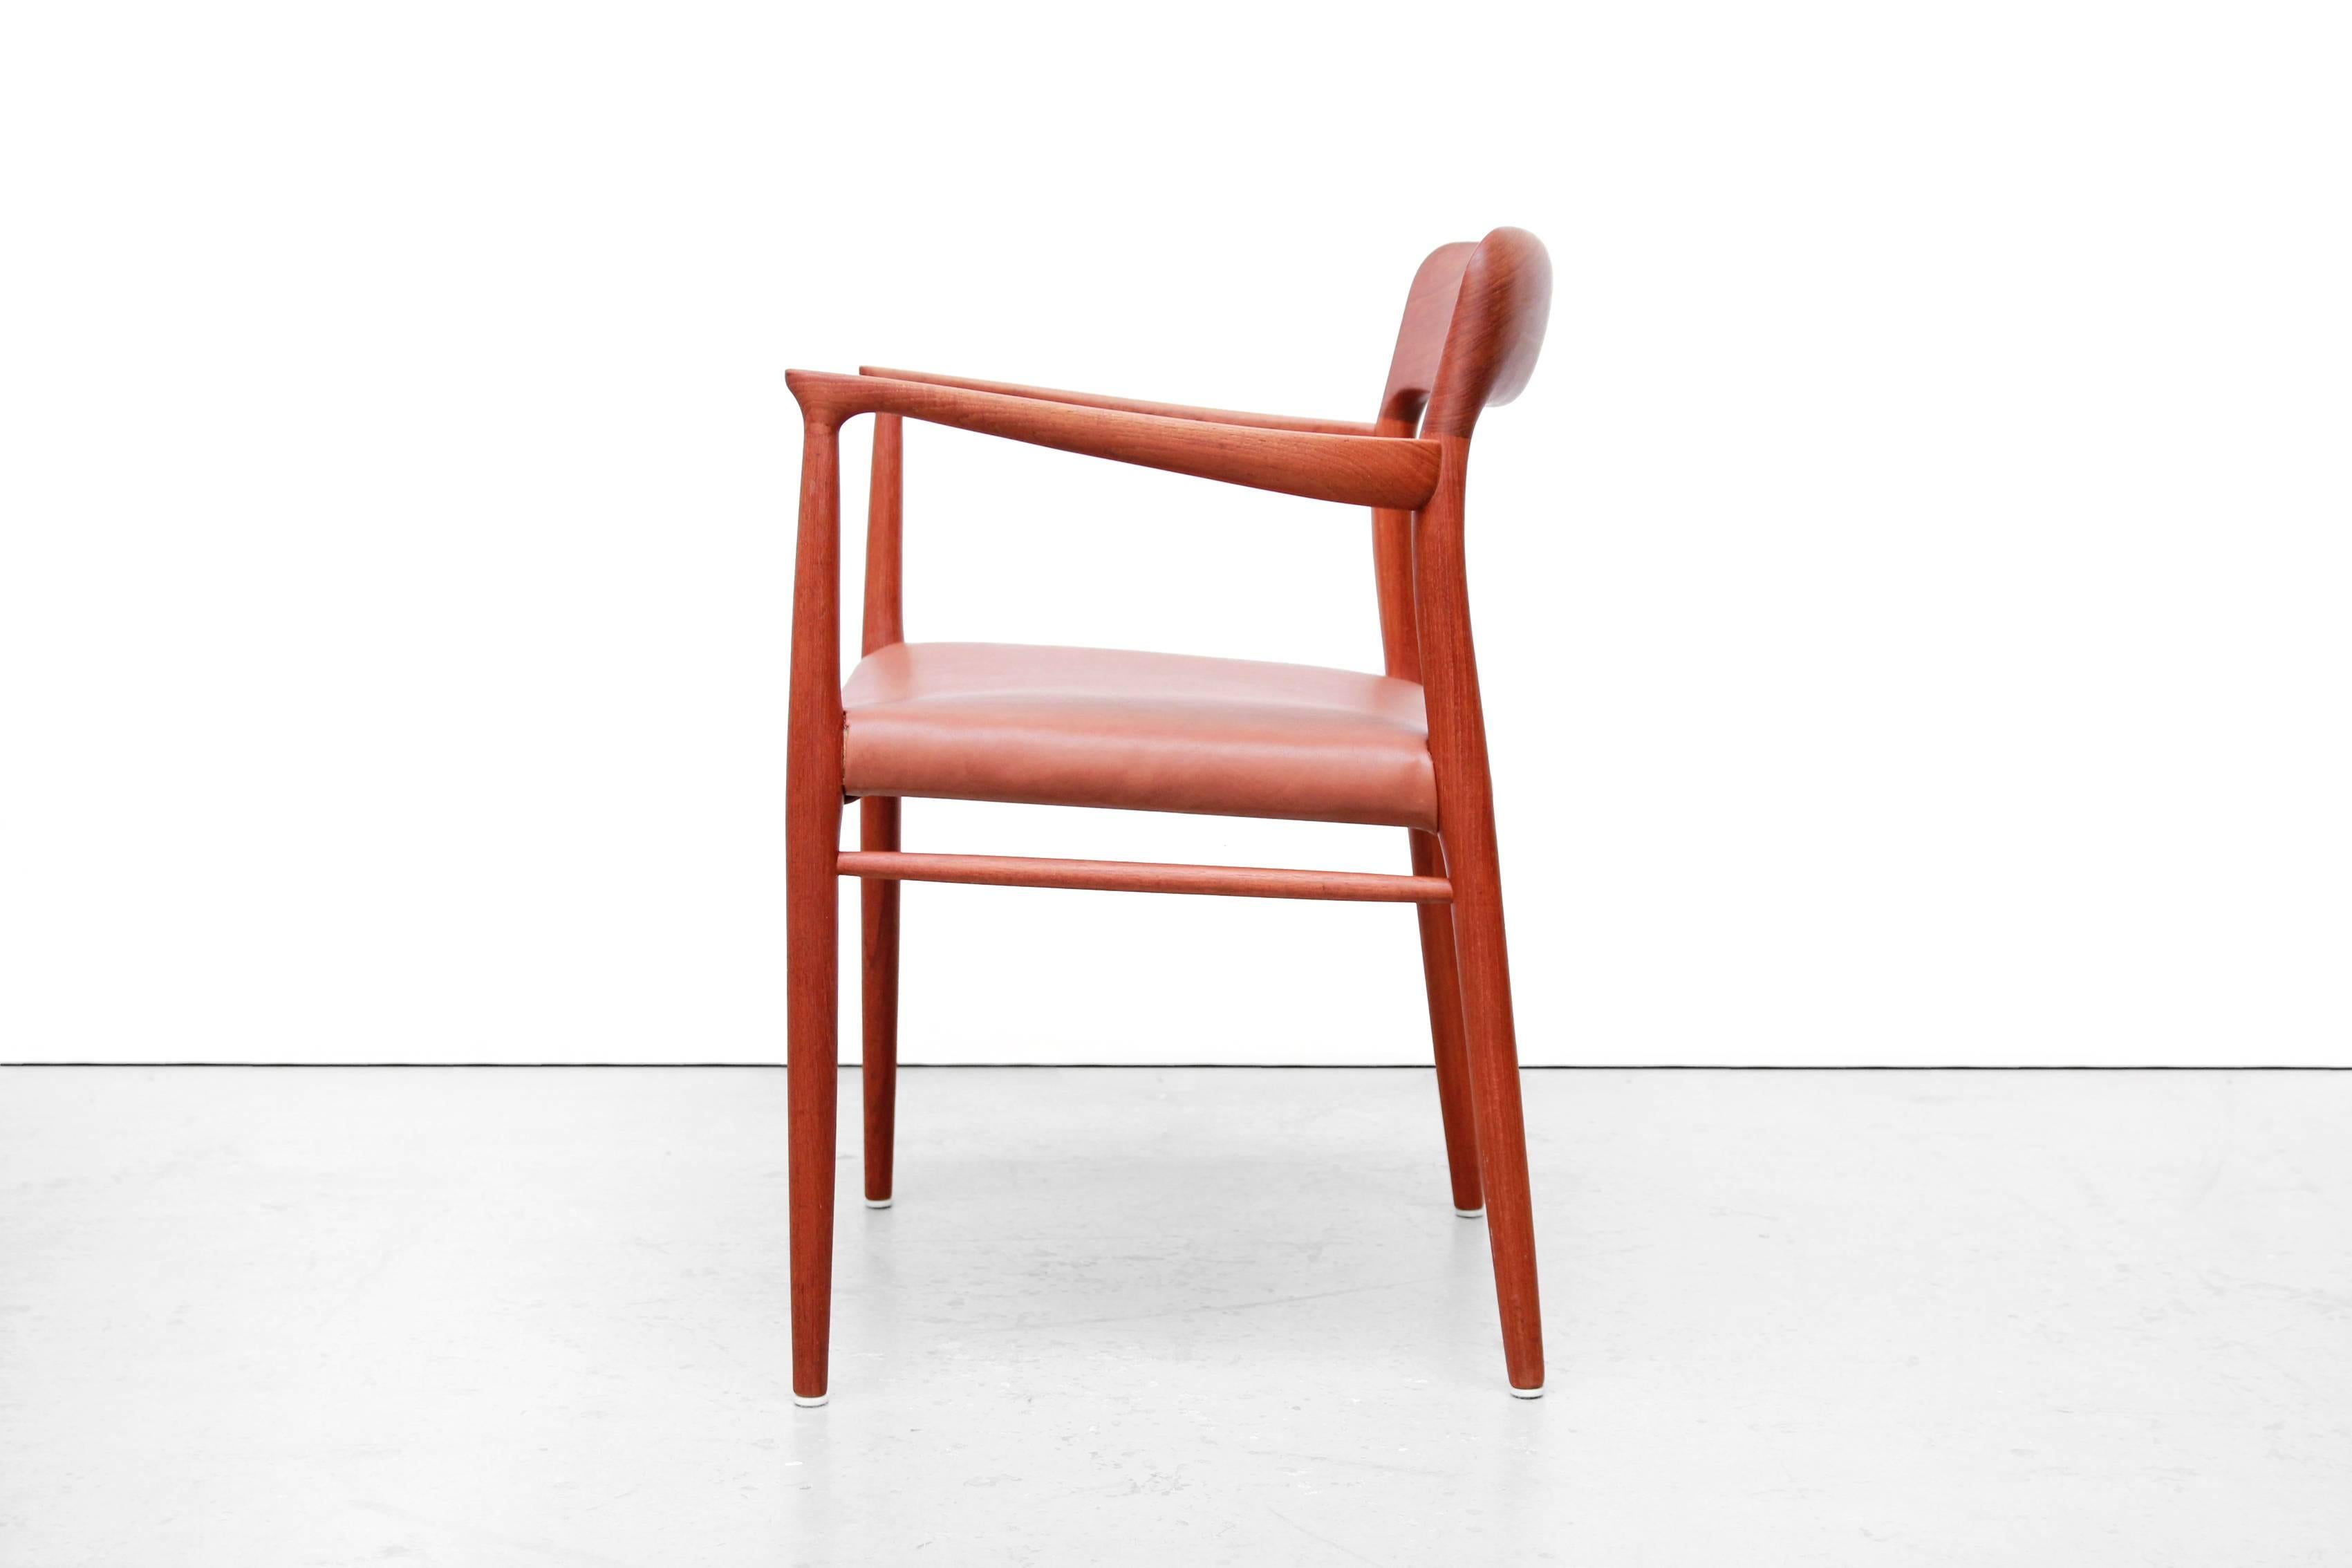 Beautiful high armchair or comfortable dining chair with armrests designed by Niels Møller. Niels Møller is known in Denmark for quality and craftsmanship and is also well-liked in this model, model 56. According to the first owner of this chair,